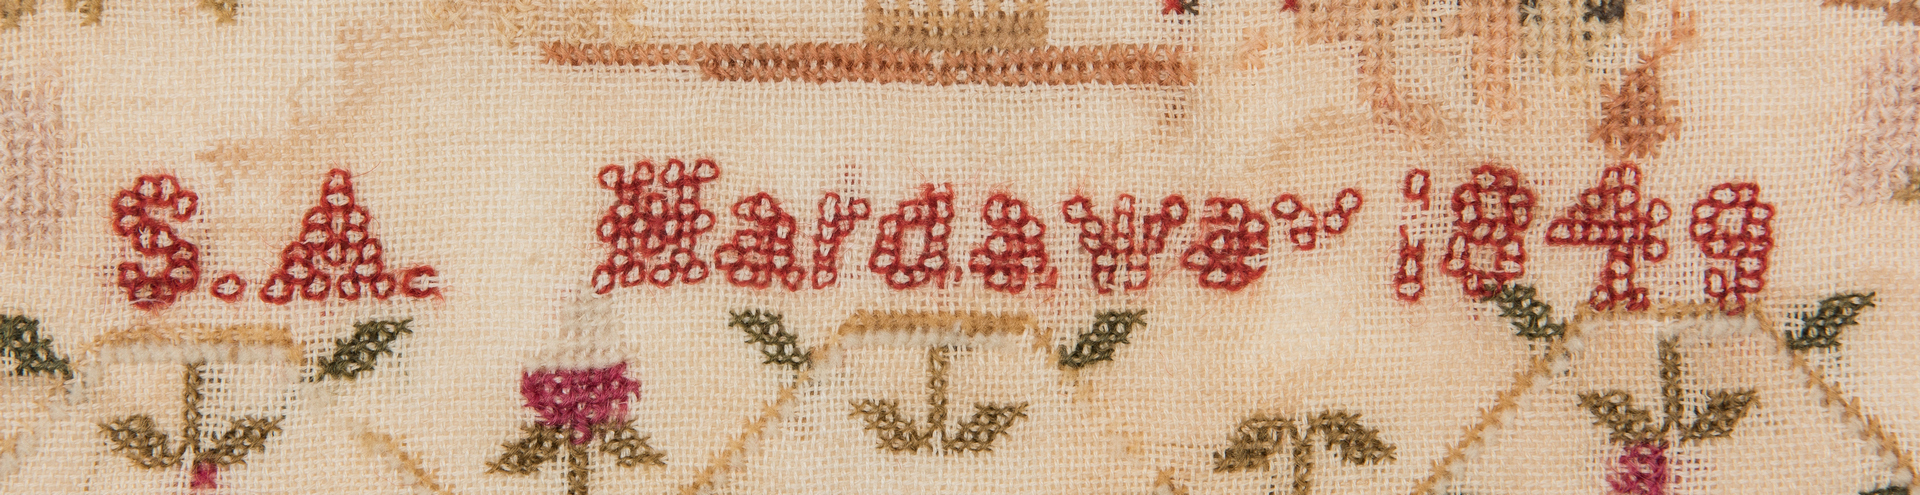 Lot 896: 2 19th Cent. Textiles, incl. Sampler, Silk Embroidery